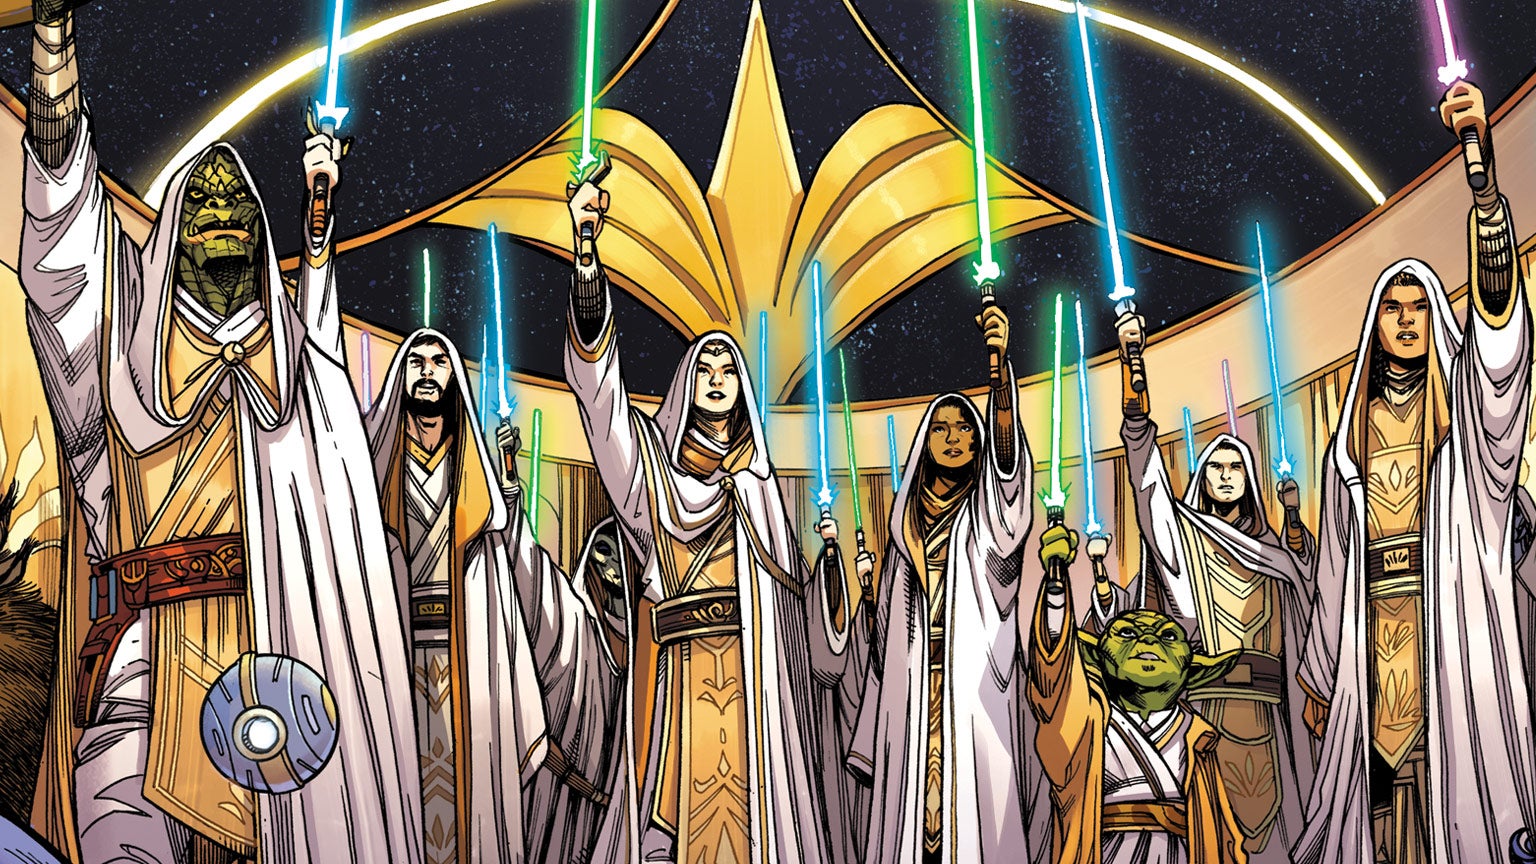 Star Wars: The High Republic is going into the past. (Image: Marvel Comics/Lucasfilm)